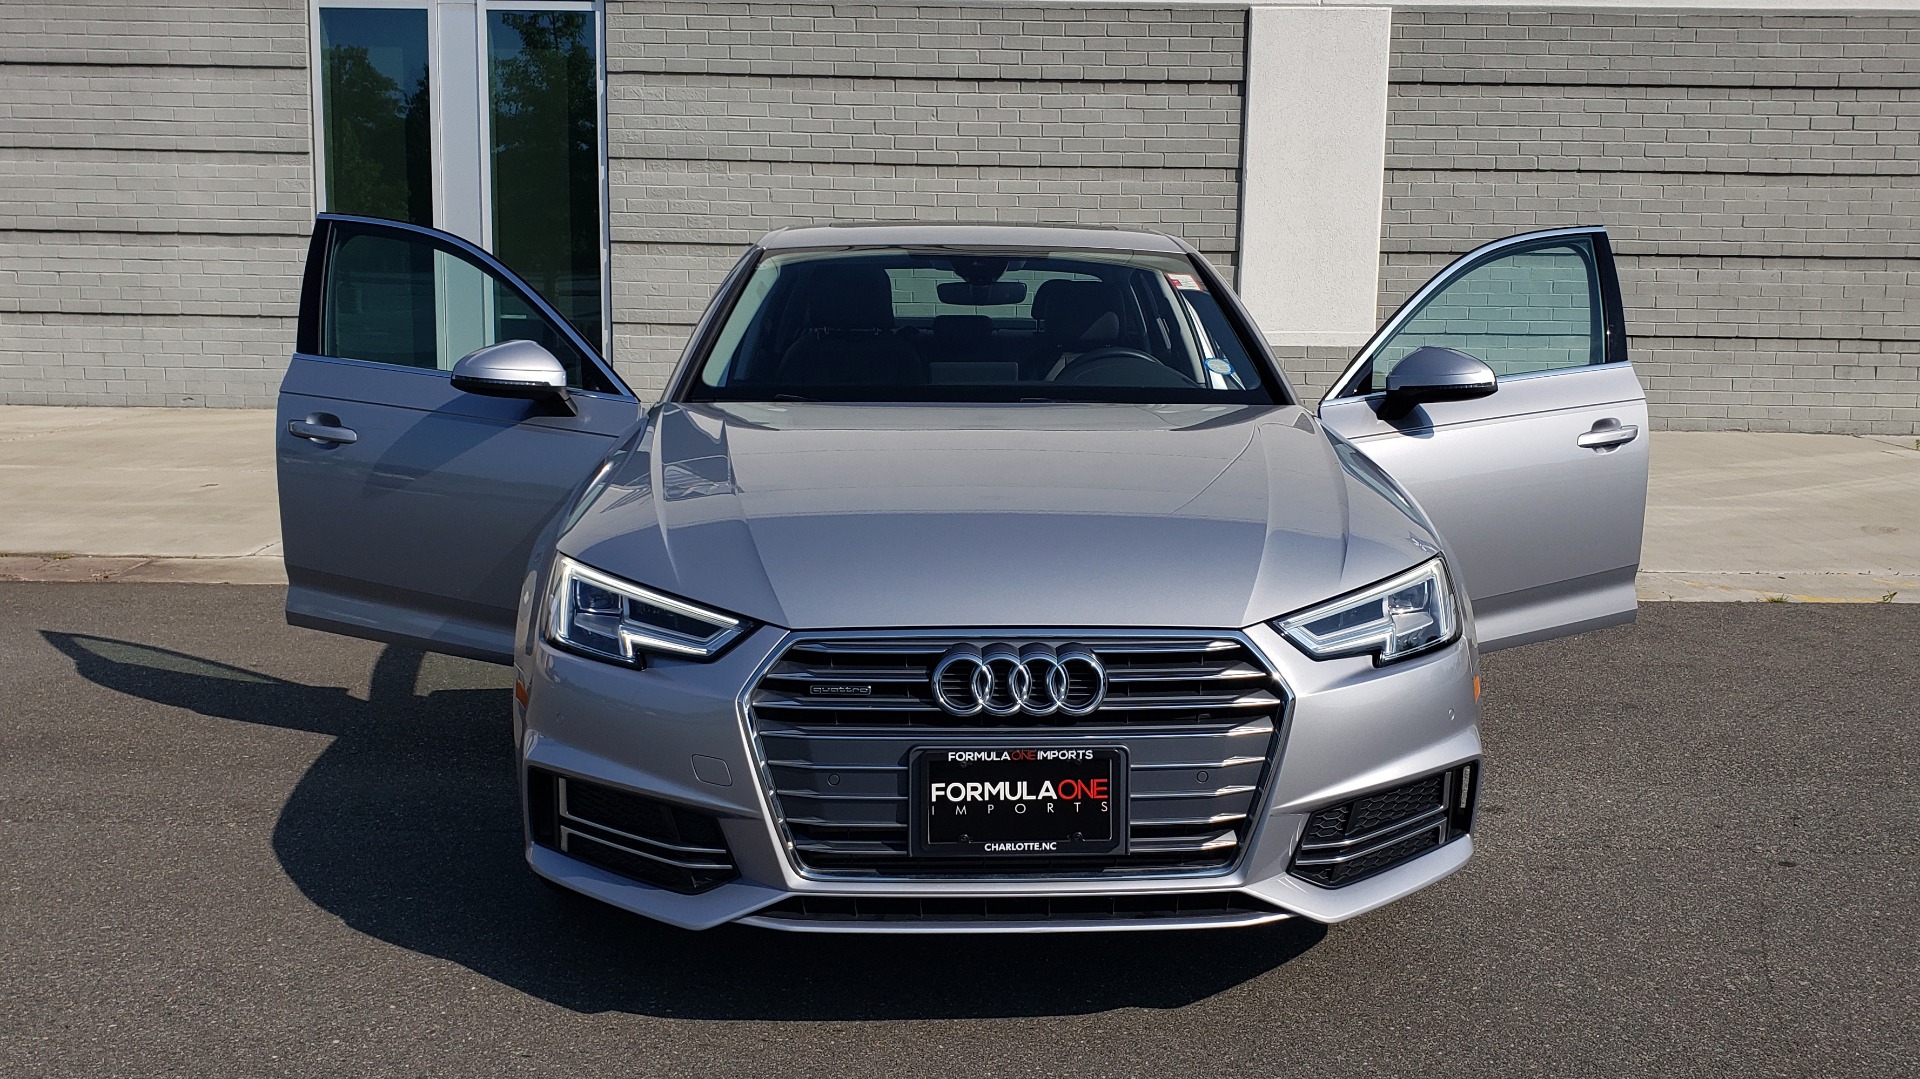 Used 2018 Audi A4 PREMIUM PLUS 2.0T / NAV / SUNROOF / B&O SND / CLD WTHR / REARVIEW for sale Sold at Formula Imports in Charlotte NC 28227 22